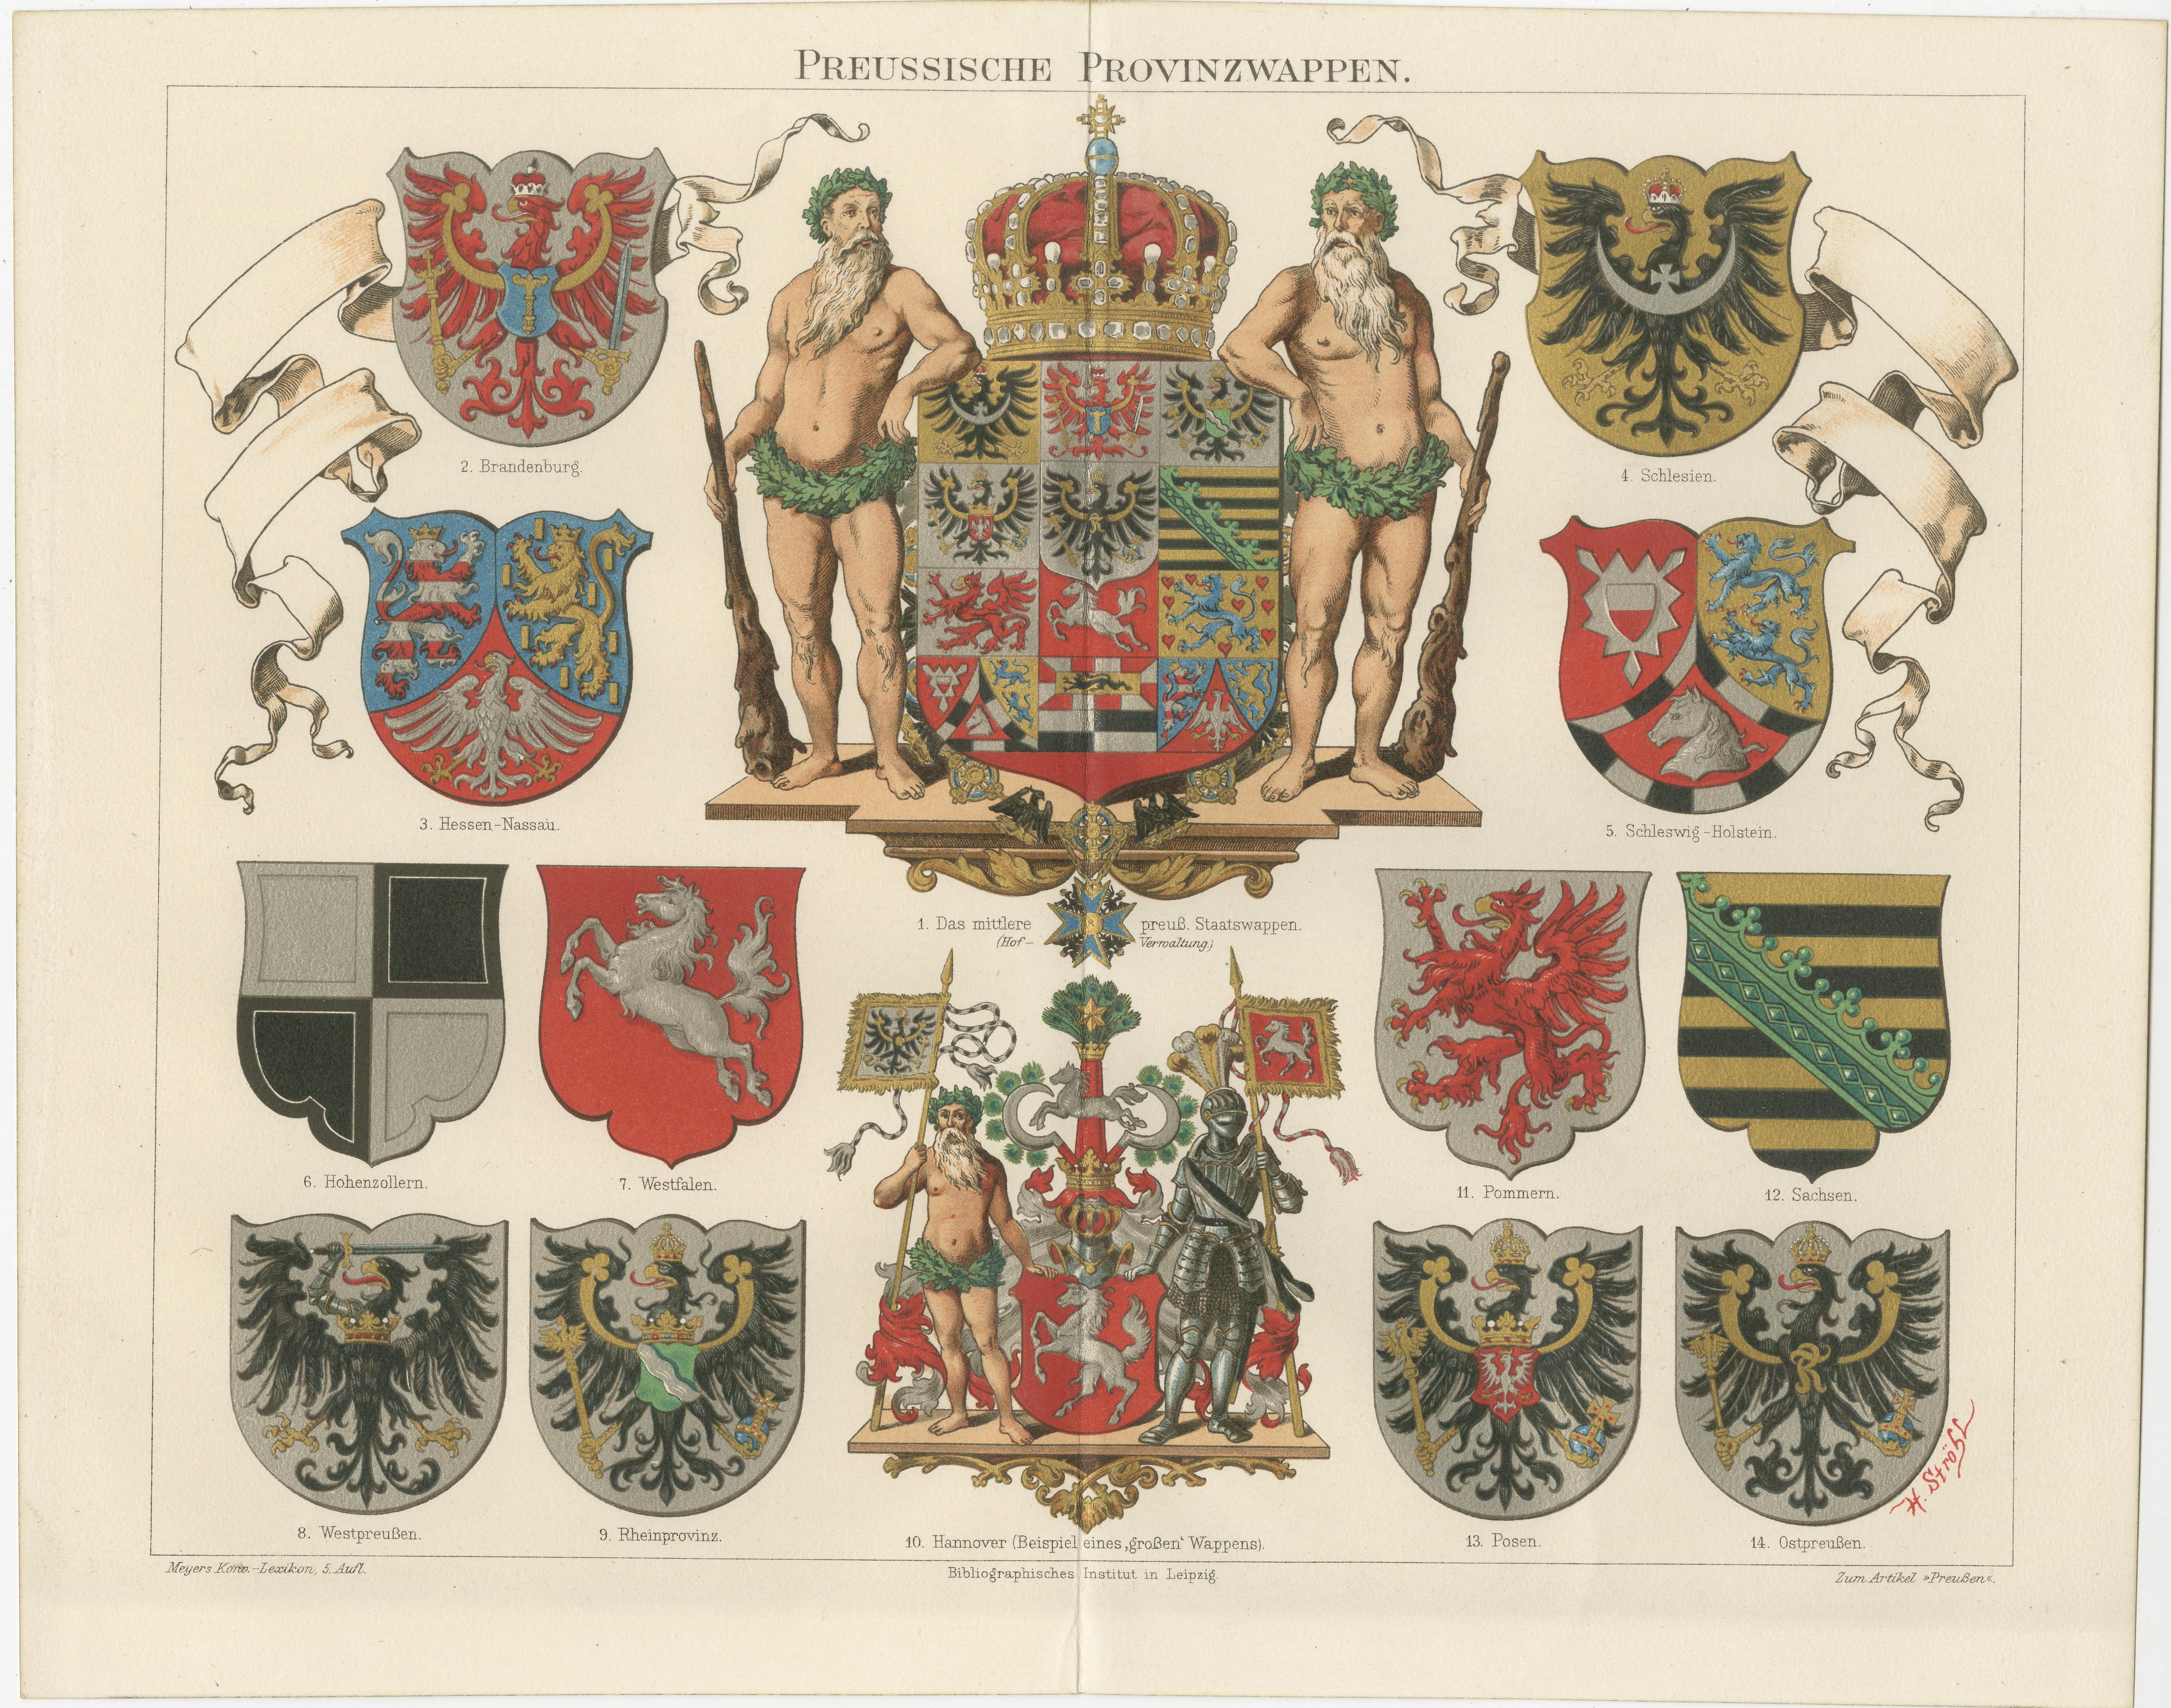 Antique print titled 'Preussische Provinzwappen'. Original antique chromolithograph of Prussian Coats of Arms. This print originates from Volume 5 of Meyers Konversations-Lexikon, published between 1893 and 1897. 

Meyers